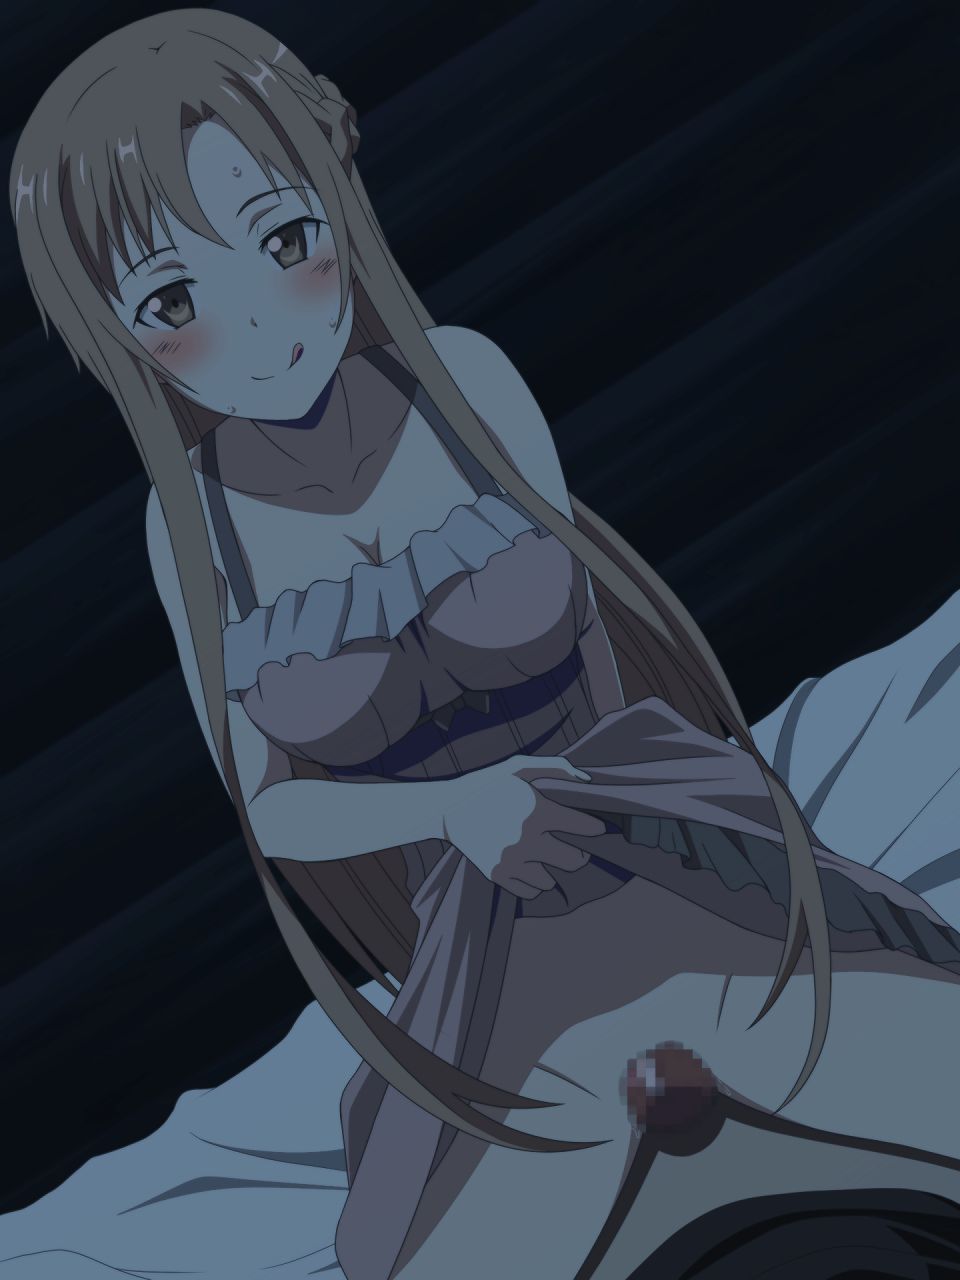 [Sword Art Online (SAO)] No. 50 erotic images such as Kana-chan and straight Leaf Chan tomorrow 42